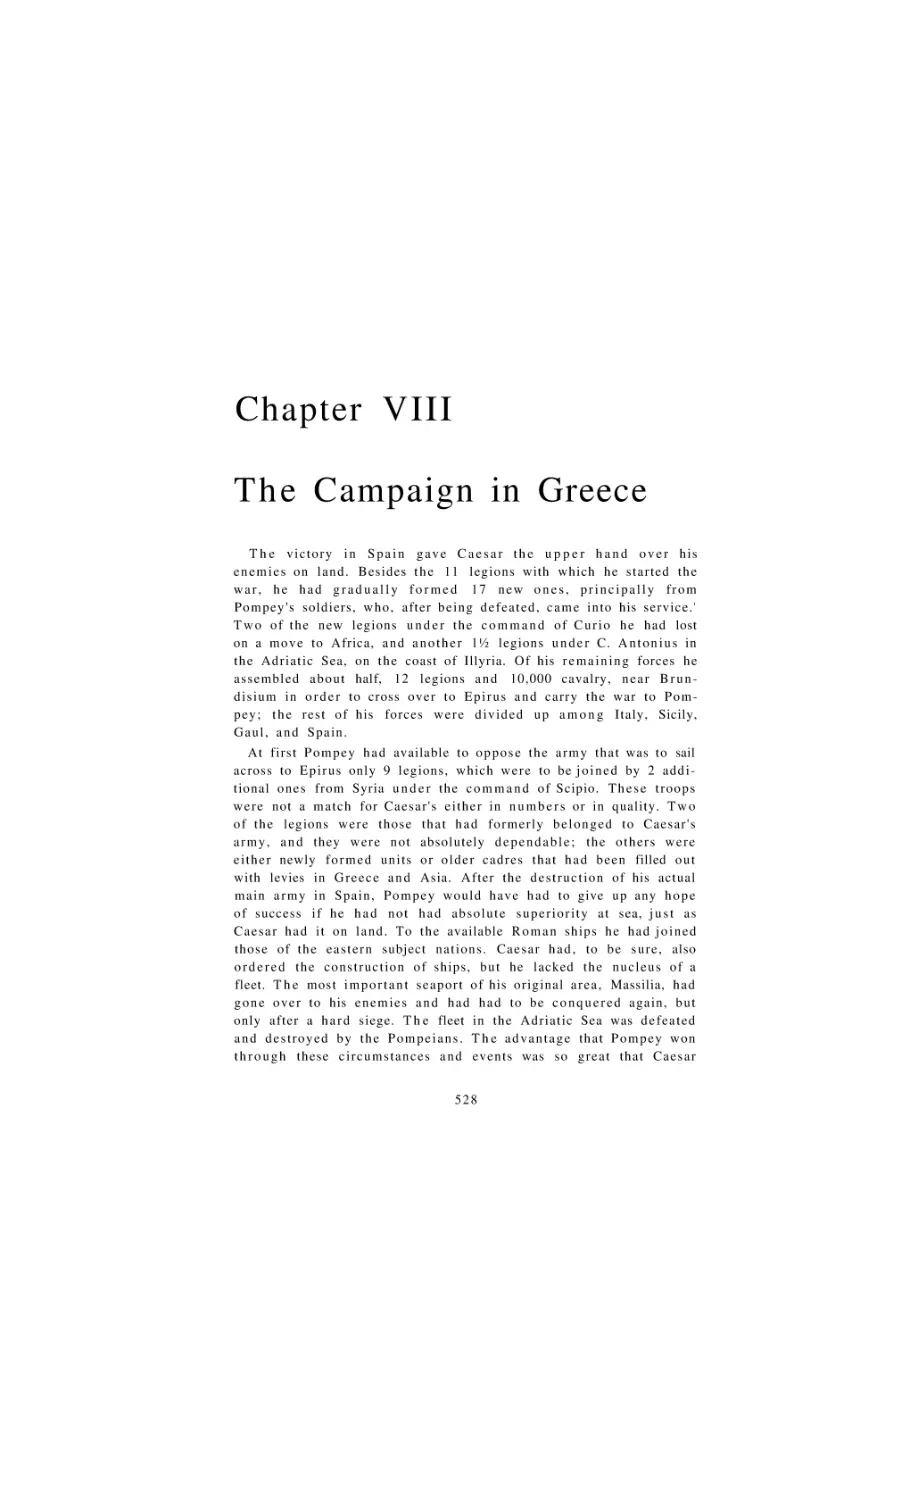 The Campaign in Greece